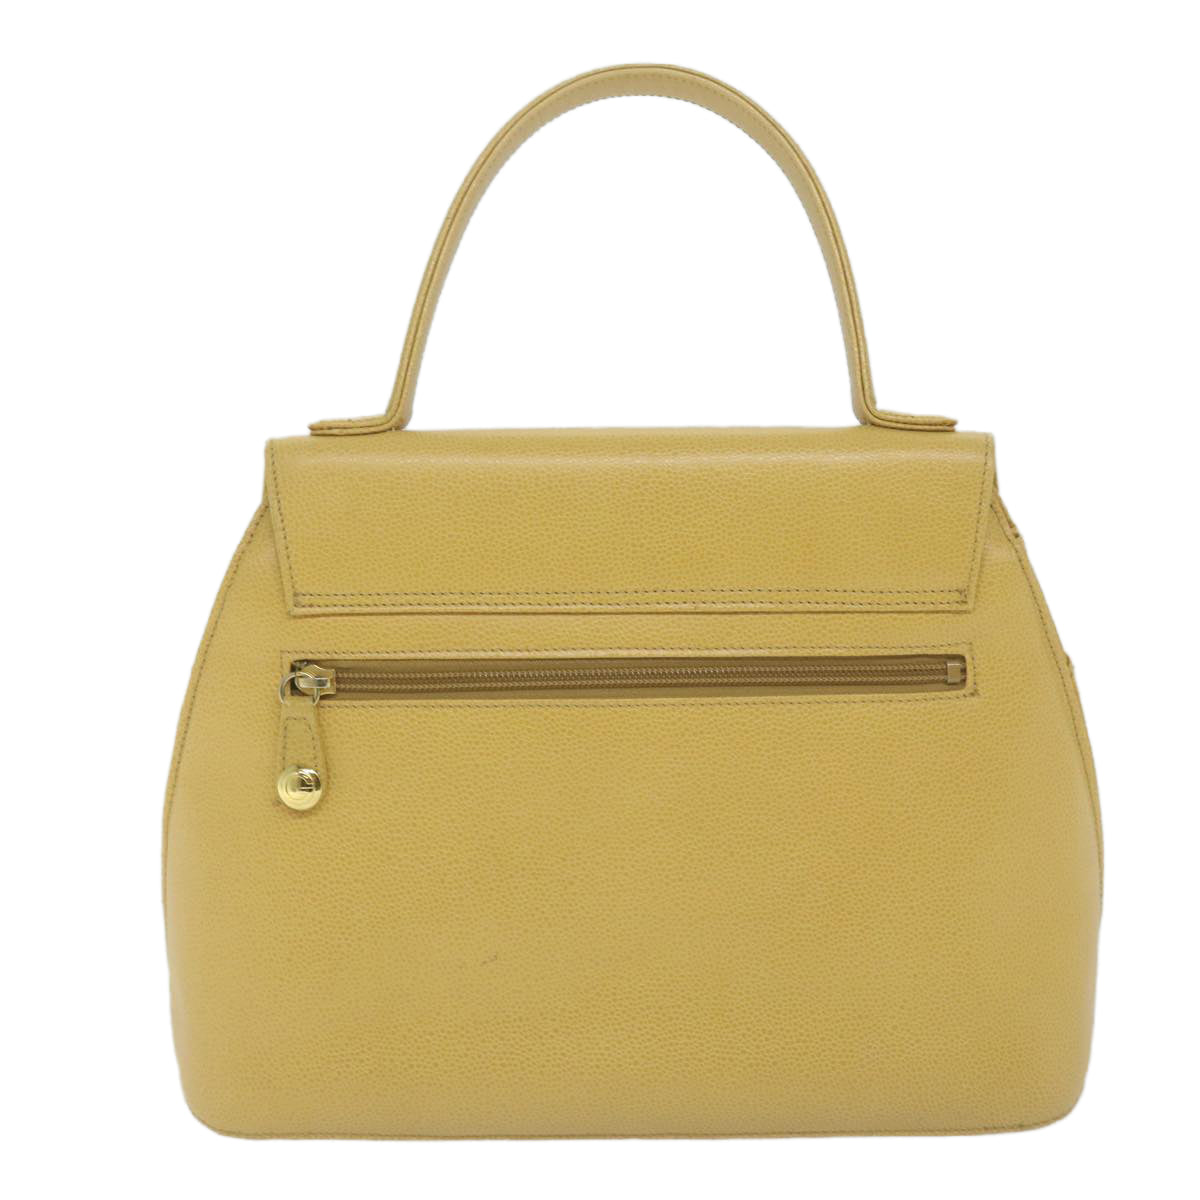 GIVENCHY Hand Bag Leather Yellow Auth am5714 - 0